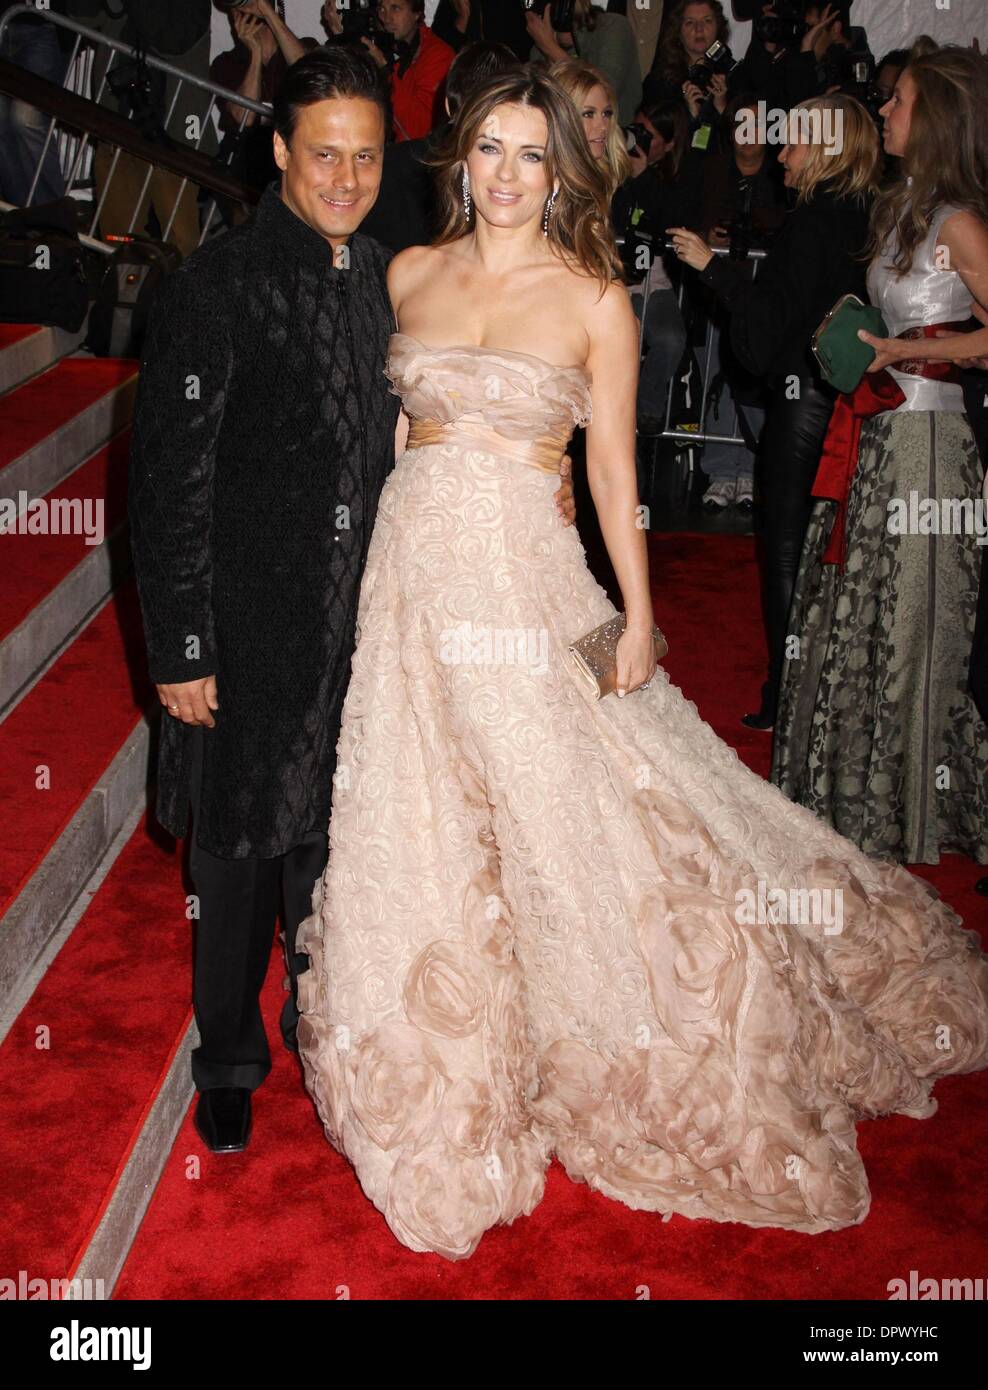 May 04, 2009 - New York, New York, USA - LIZ HURLEY and ARUN NAYAR attend the Costume Institute Gala opening of 'The Model as Muse: Embodying Fashion' held at the Metropolitan Museum of Art. (Credit Image: Â© Nancy Kaszerman/ZUMA Press) Stock Photo